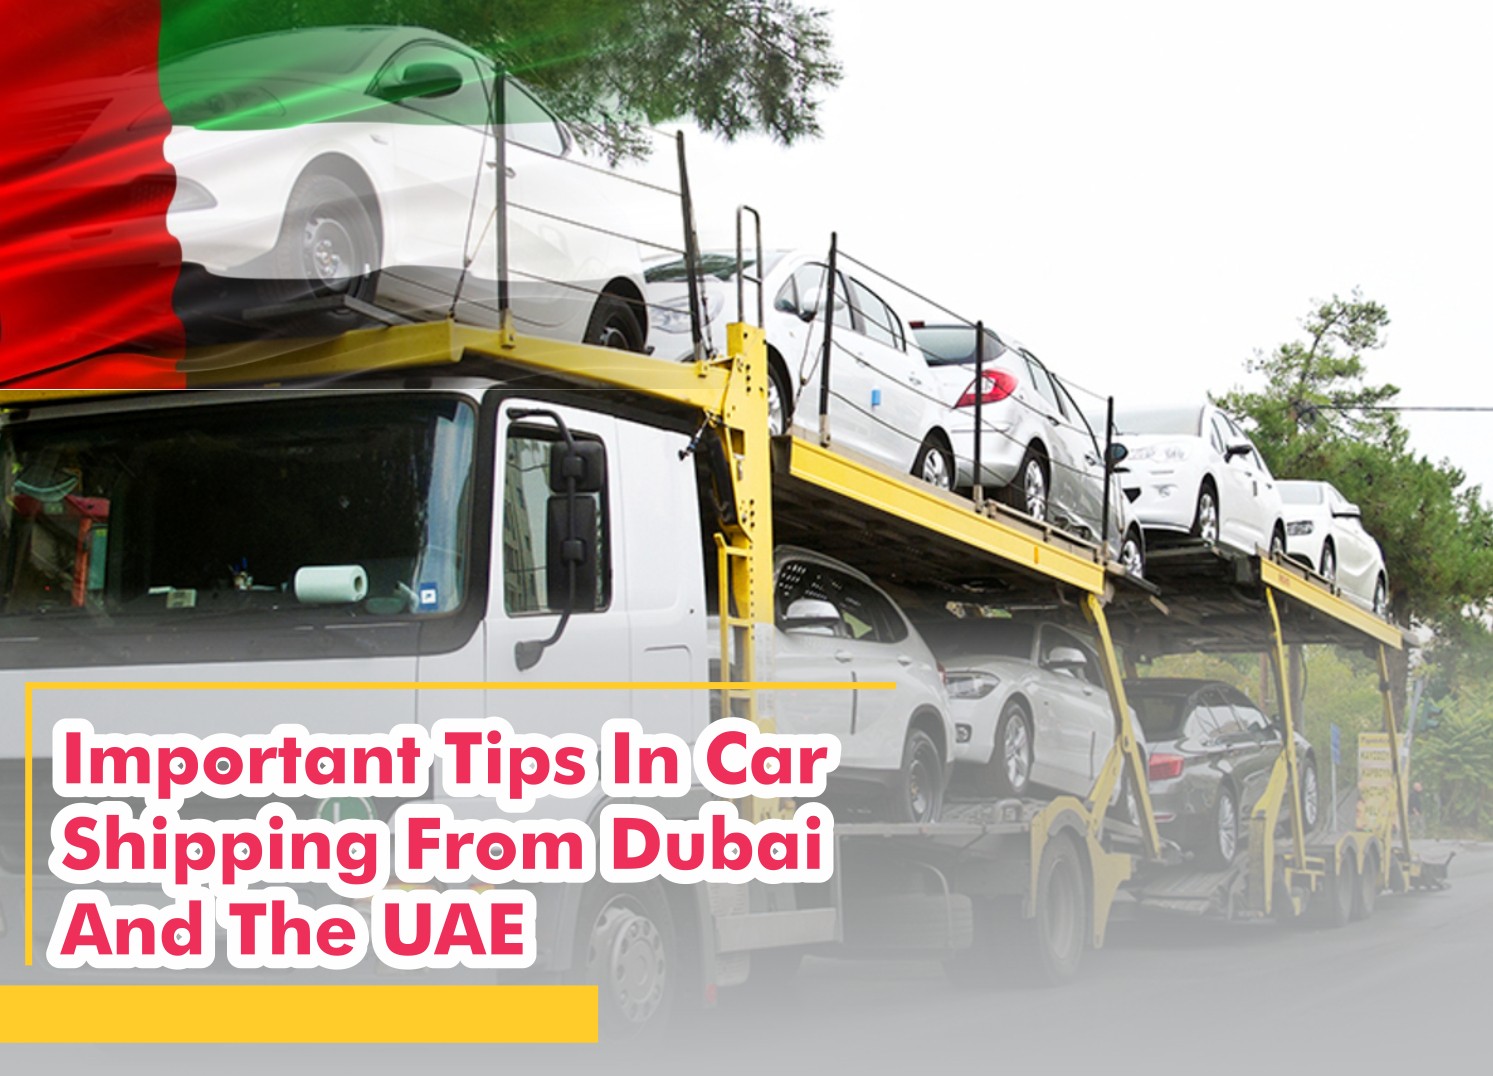 Important Tips In Car Shipping From Dubai And The UAE